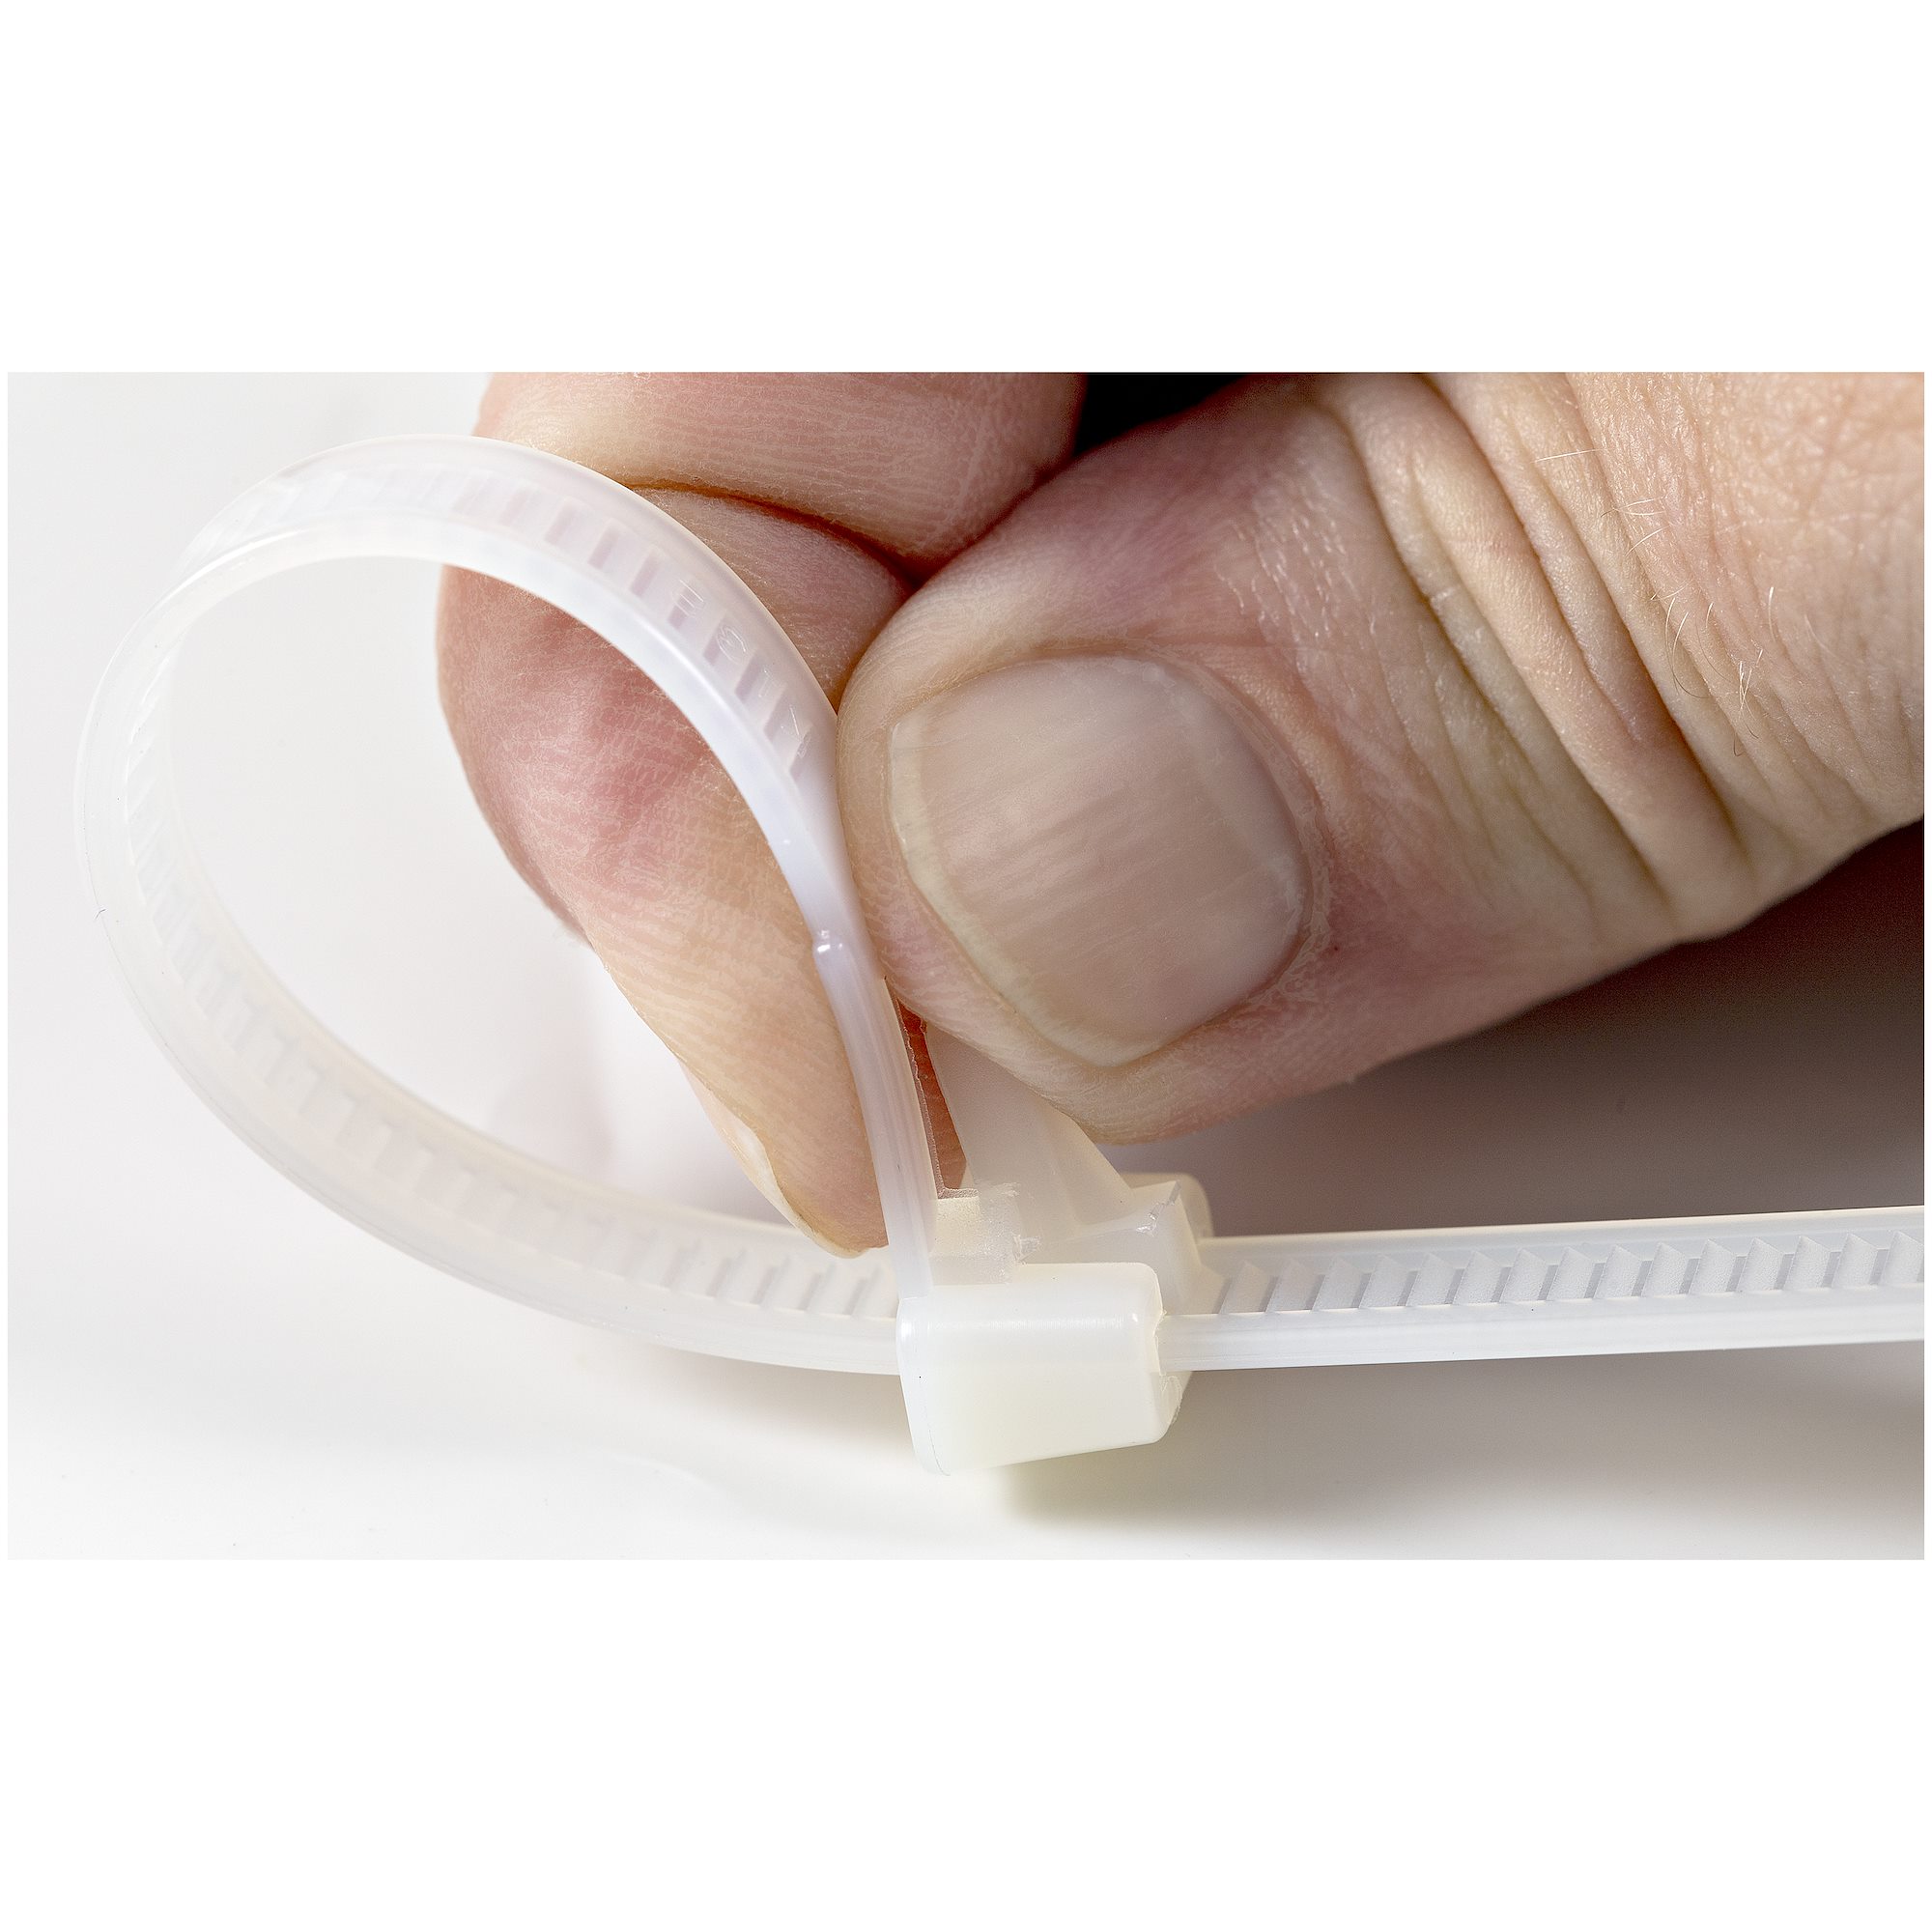 StarTech.com Cable Management Raceway w/Adhesive Tape 78in - Netw